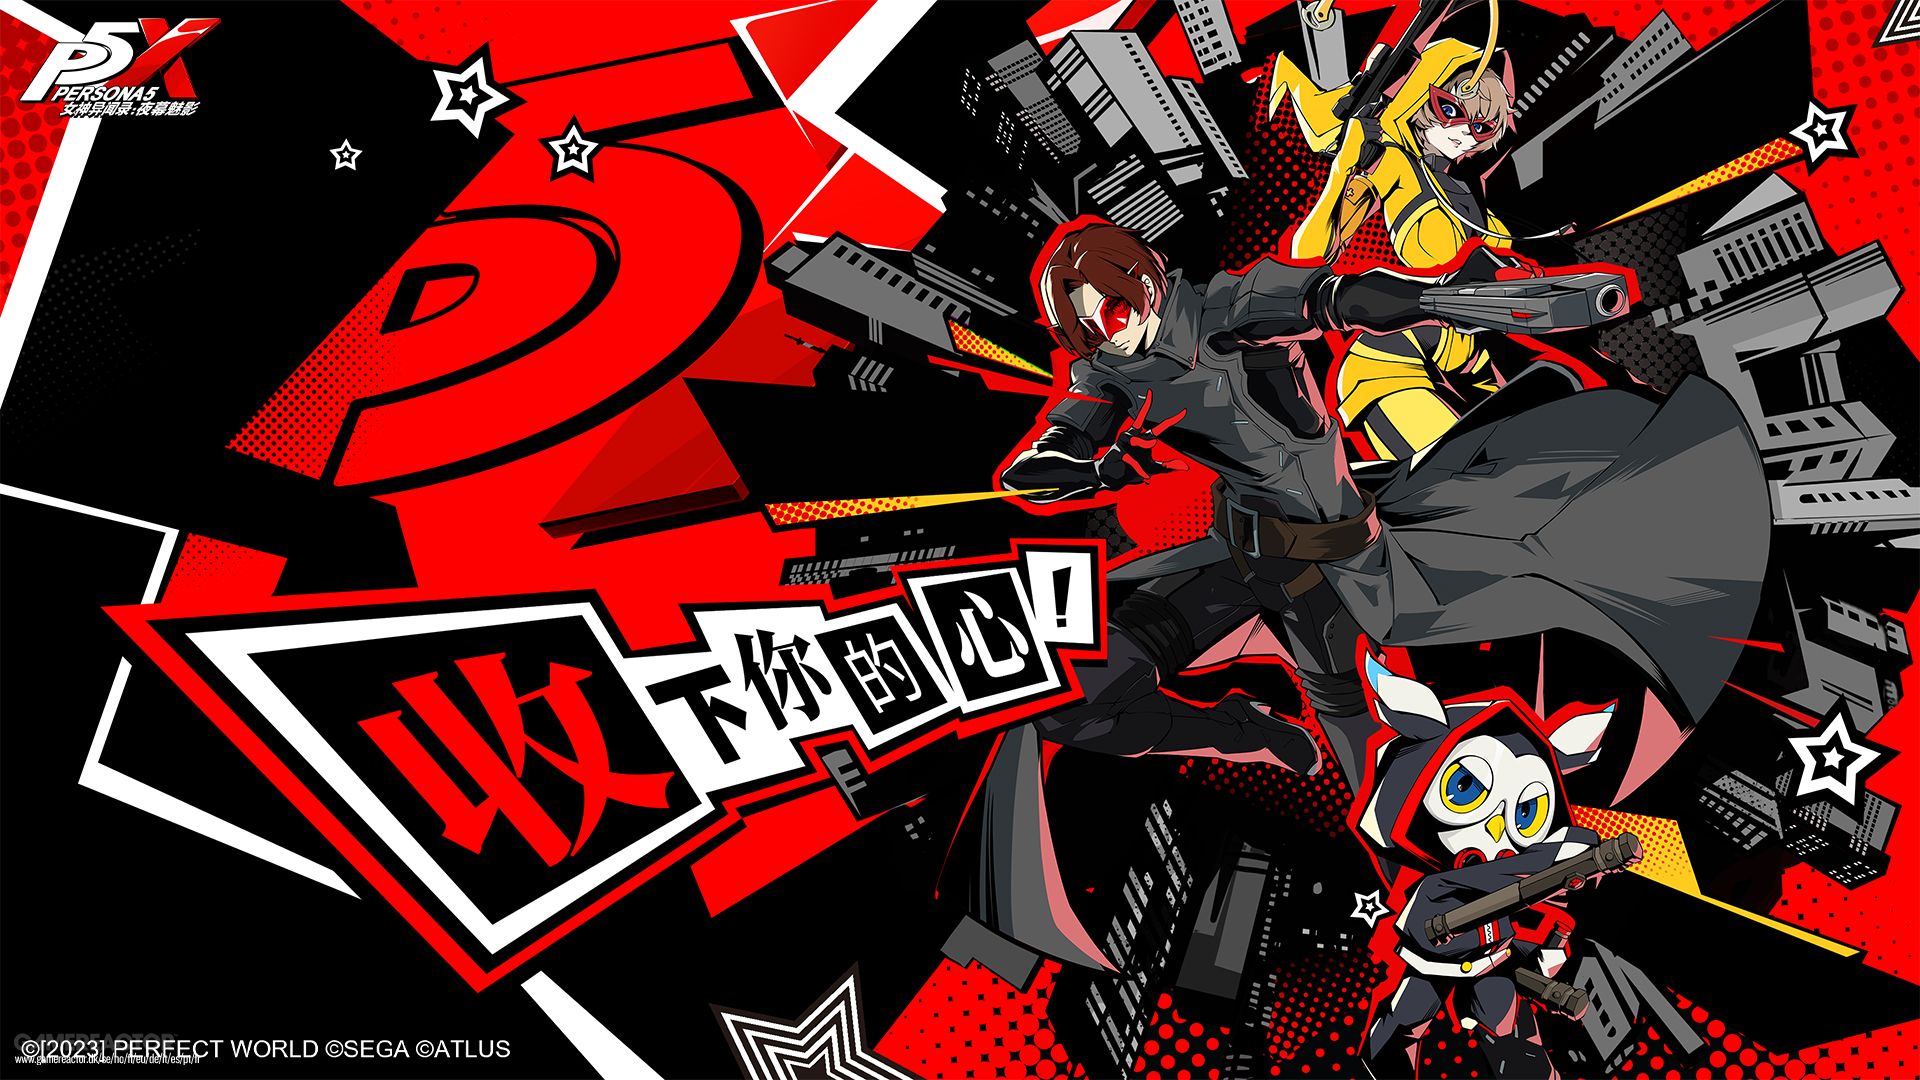 Persona 5 will have a new mobile spin-off called The Phantom X